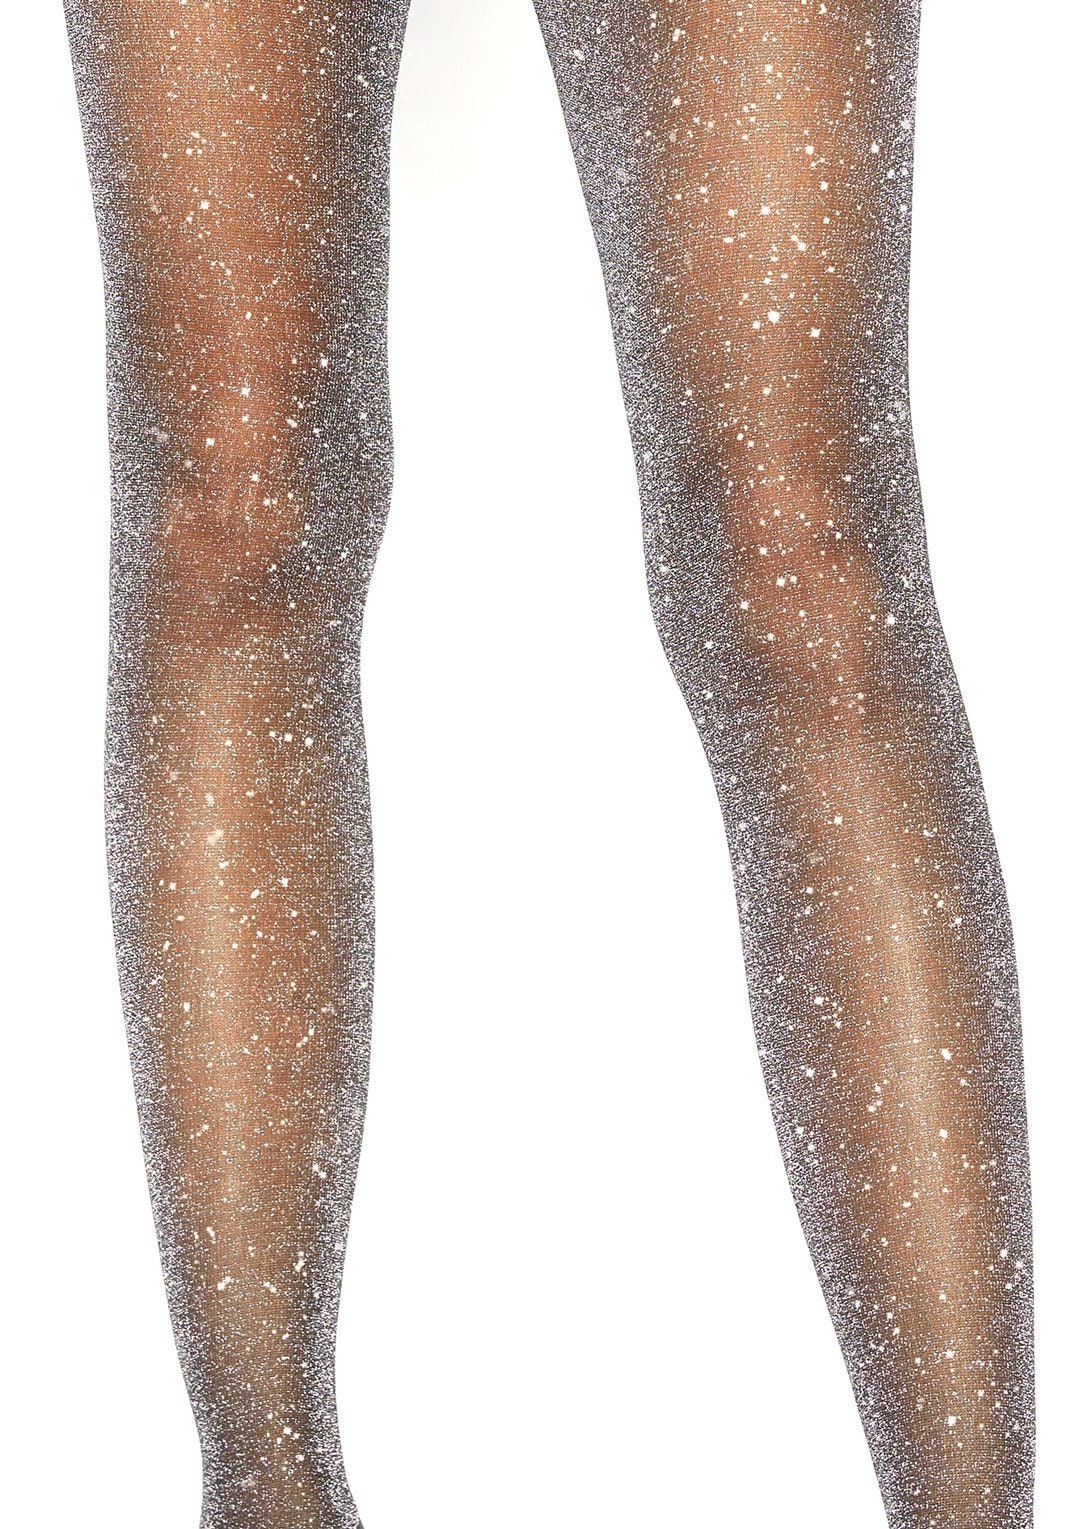 GLITTER SHIMMER TIGHTS, Black With Silver Sparkle, Panyhose Stockings -   Finland